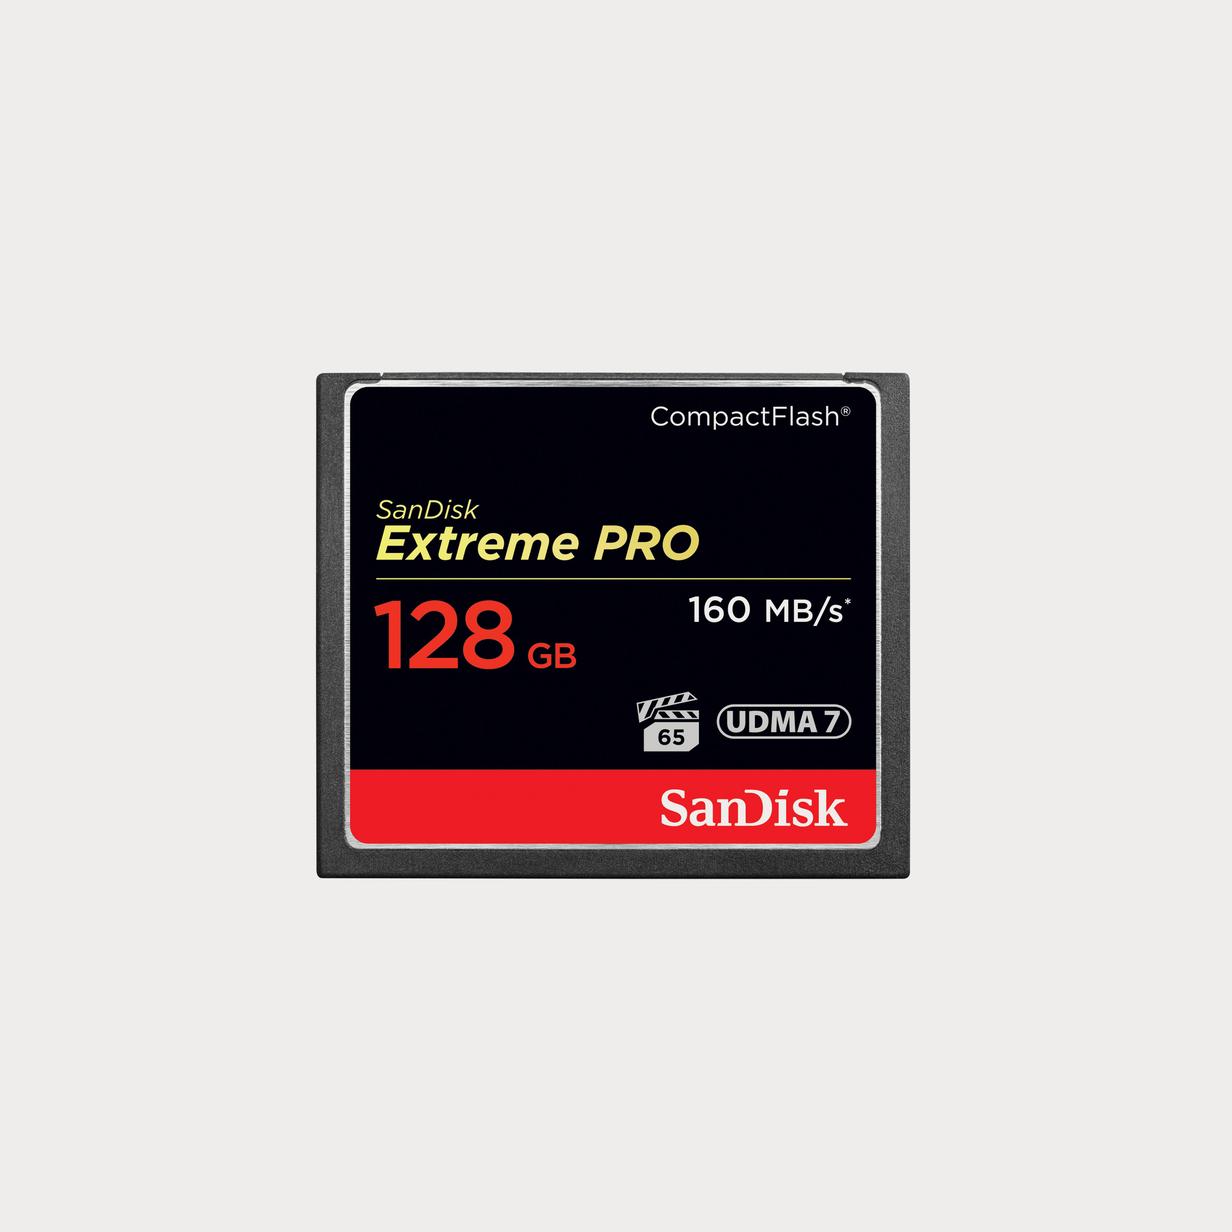 Moment sandisk SDCFXPS 128 G A46 Extreme Pro Compact Flash Memory Card 128 GB 01